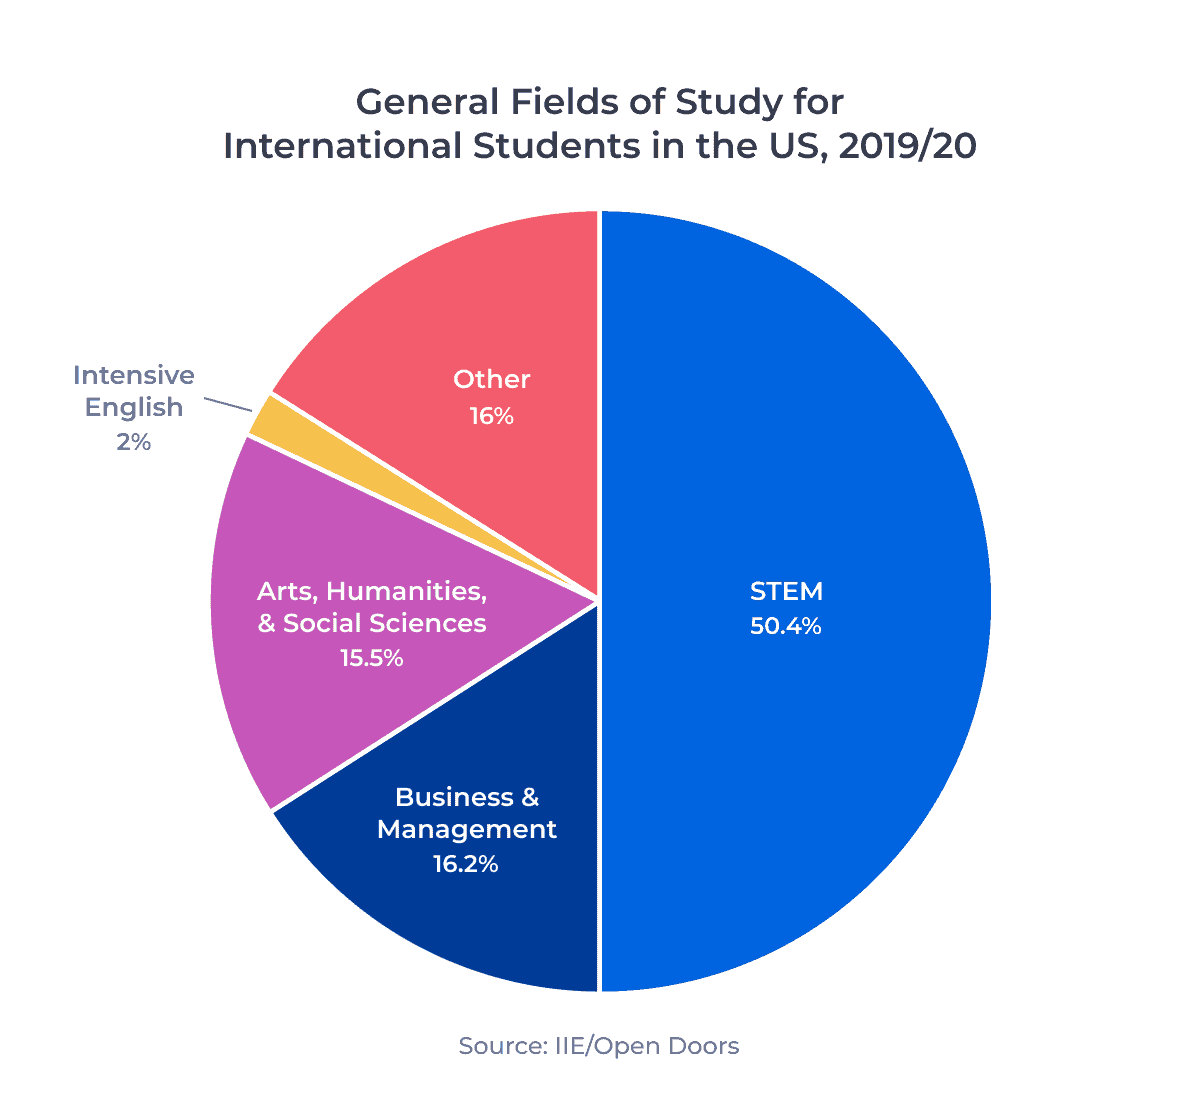 Circle graph showing the distribution of international students in the US by general field of study in academic year 2019/20.